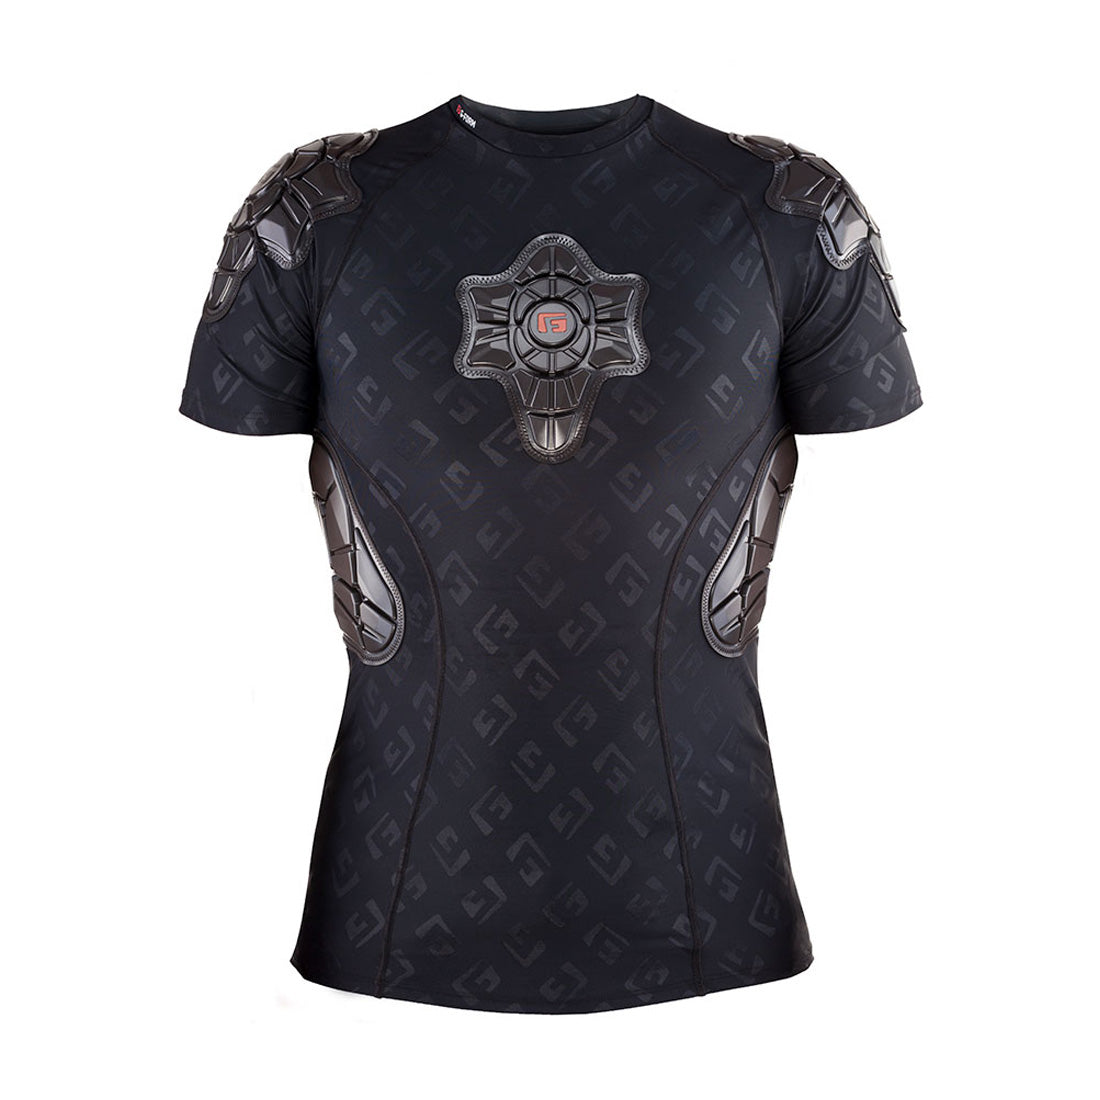 G-Form Pro-X Compression Shirt - Youth Protective Gear